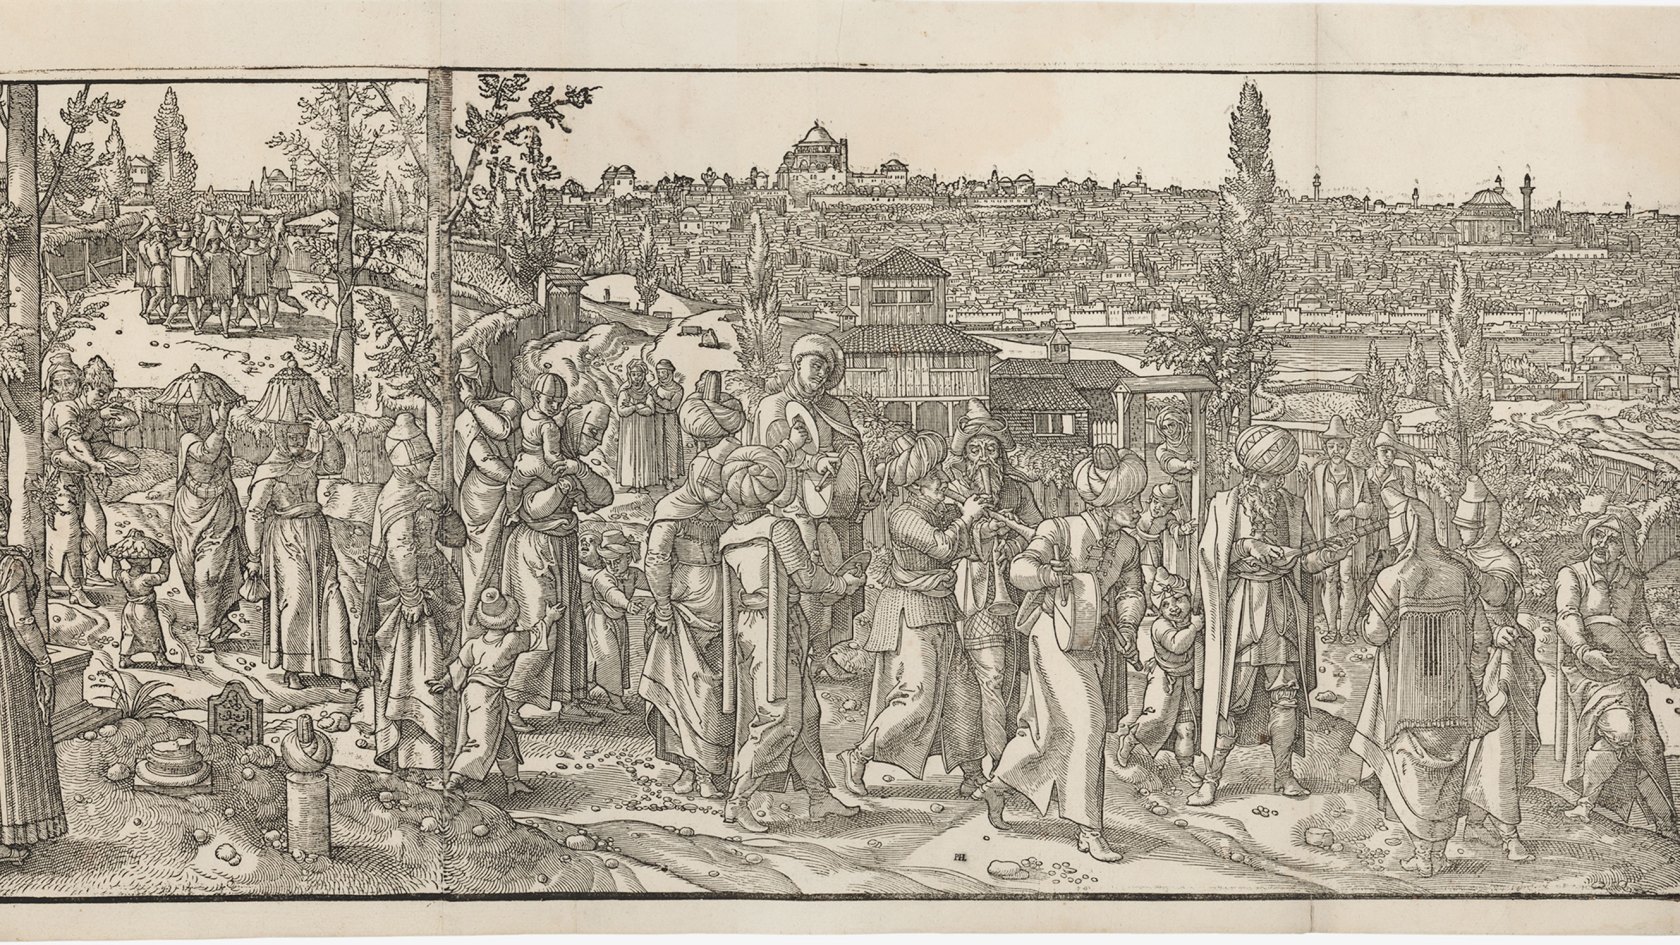 Scene 6 from “Customs and Fashions of the Turks” by Pieter Coecke van Aelst.